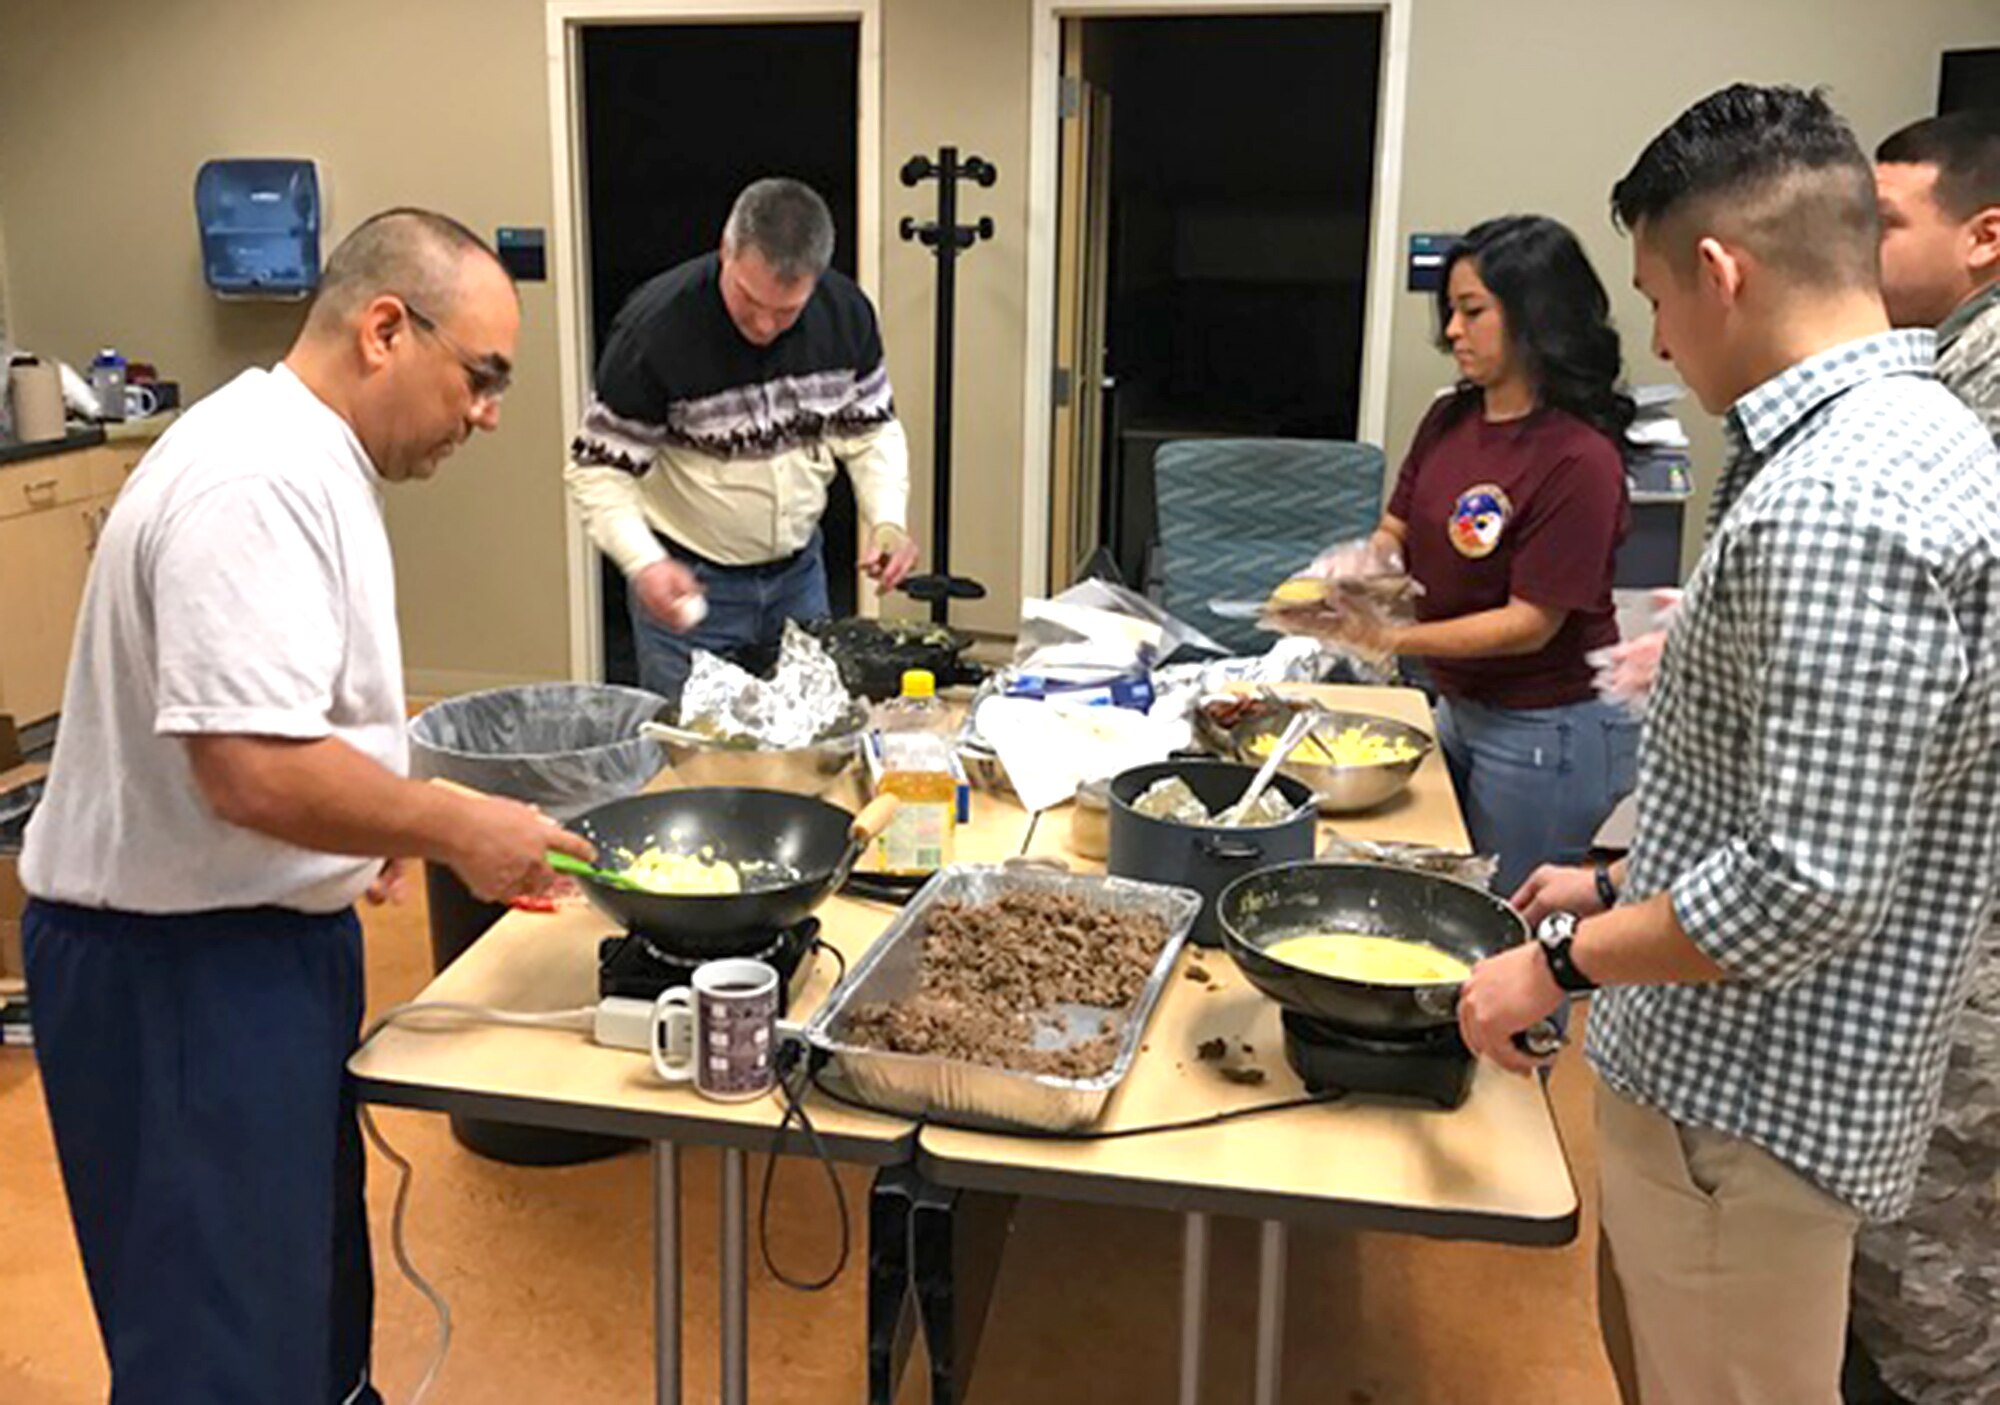 Members of the 433rd Airlift Wing Top 3 association prepare tacos for the C-5 Rodeo Breakfast Feb. 9, 2017 at Joint Base San Antonio-Lackland, Texas. (U.S. Air Force photo by Senior Master Sgt. Jorge DeJesus)